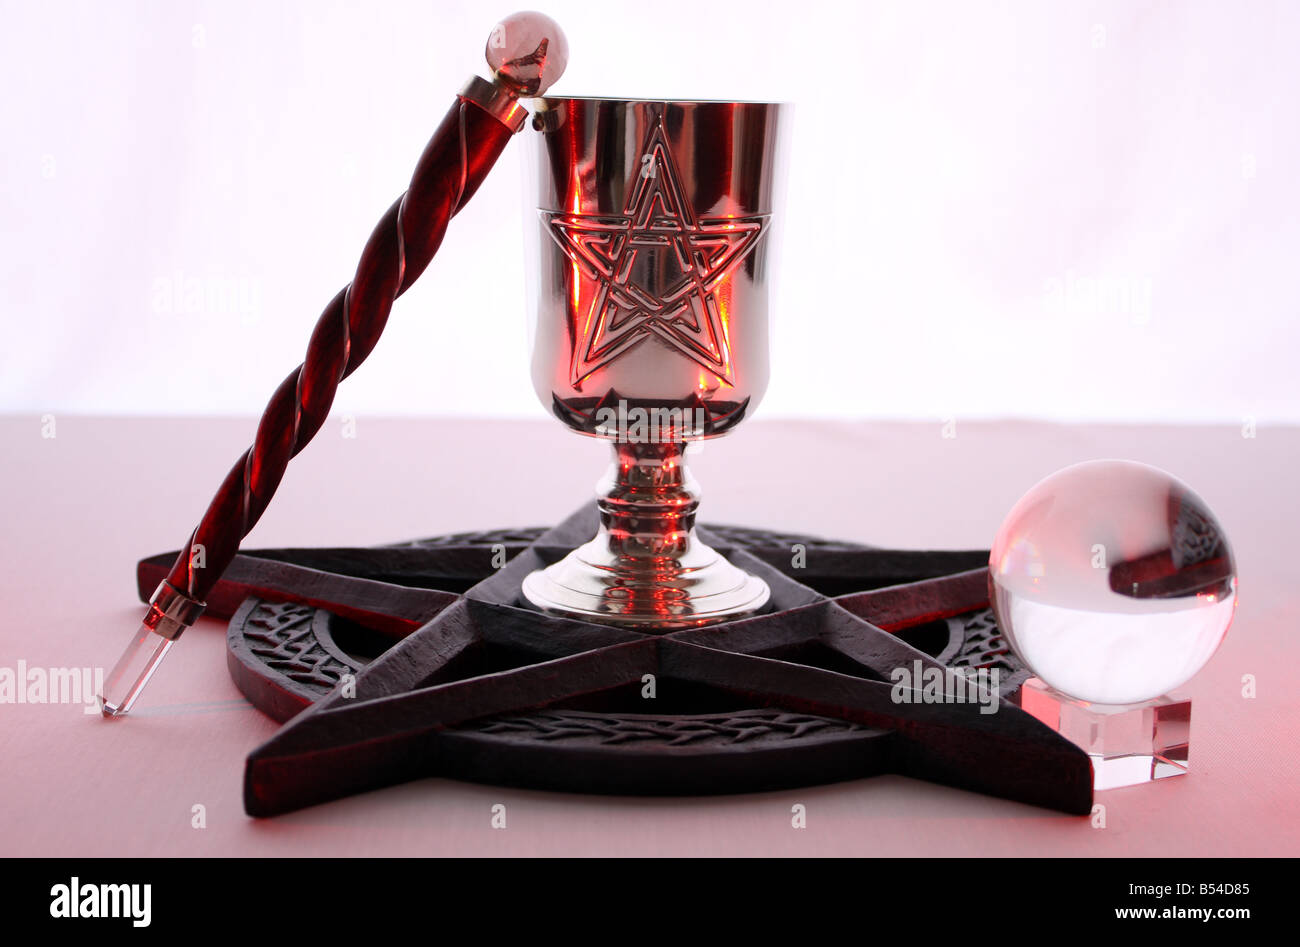 An altar ritual set up on a white background, using a Pentacle, Gemstone Quartz Chalice, Wand and Crystal Ball. Stock Photo